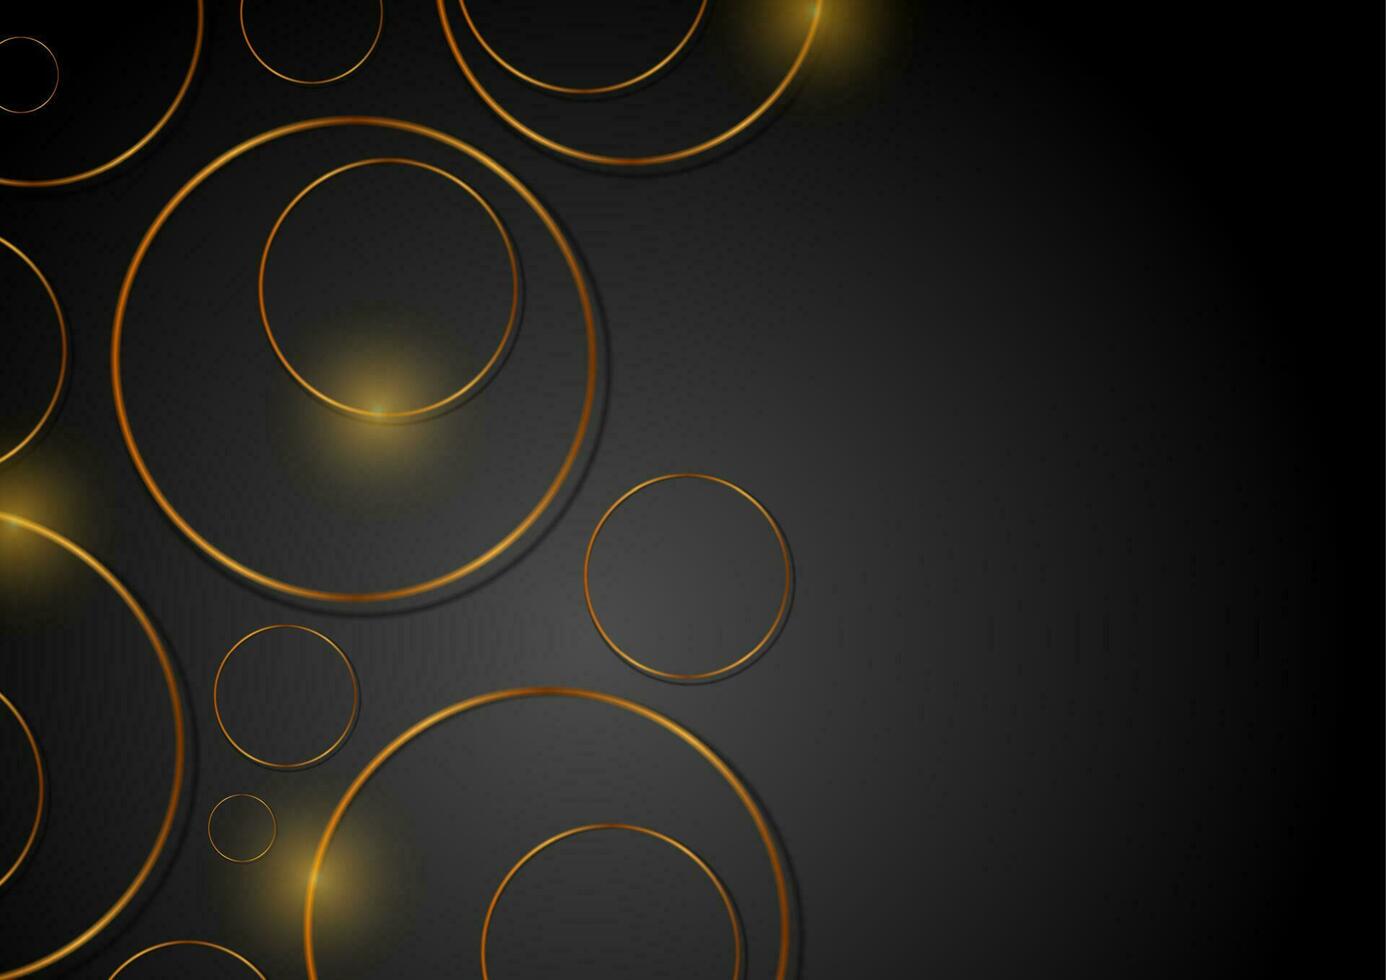 Abstract dark geometric background with golden rings vector